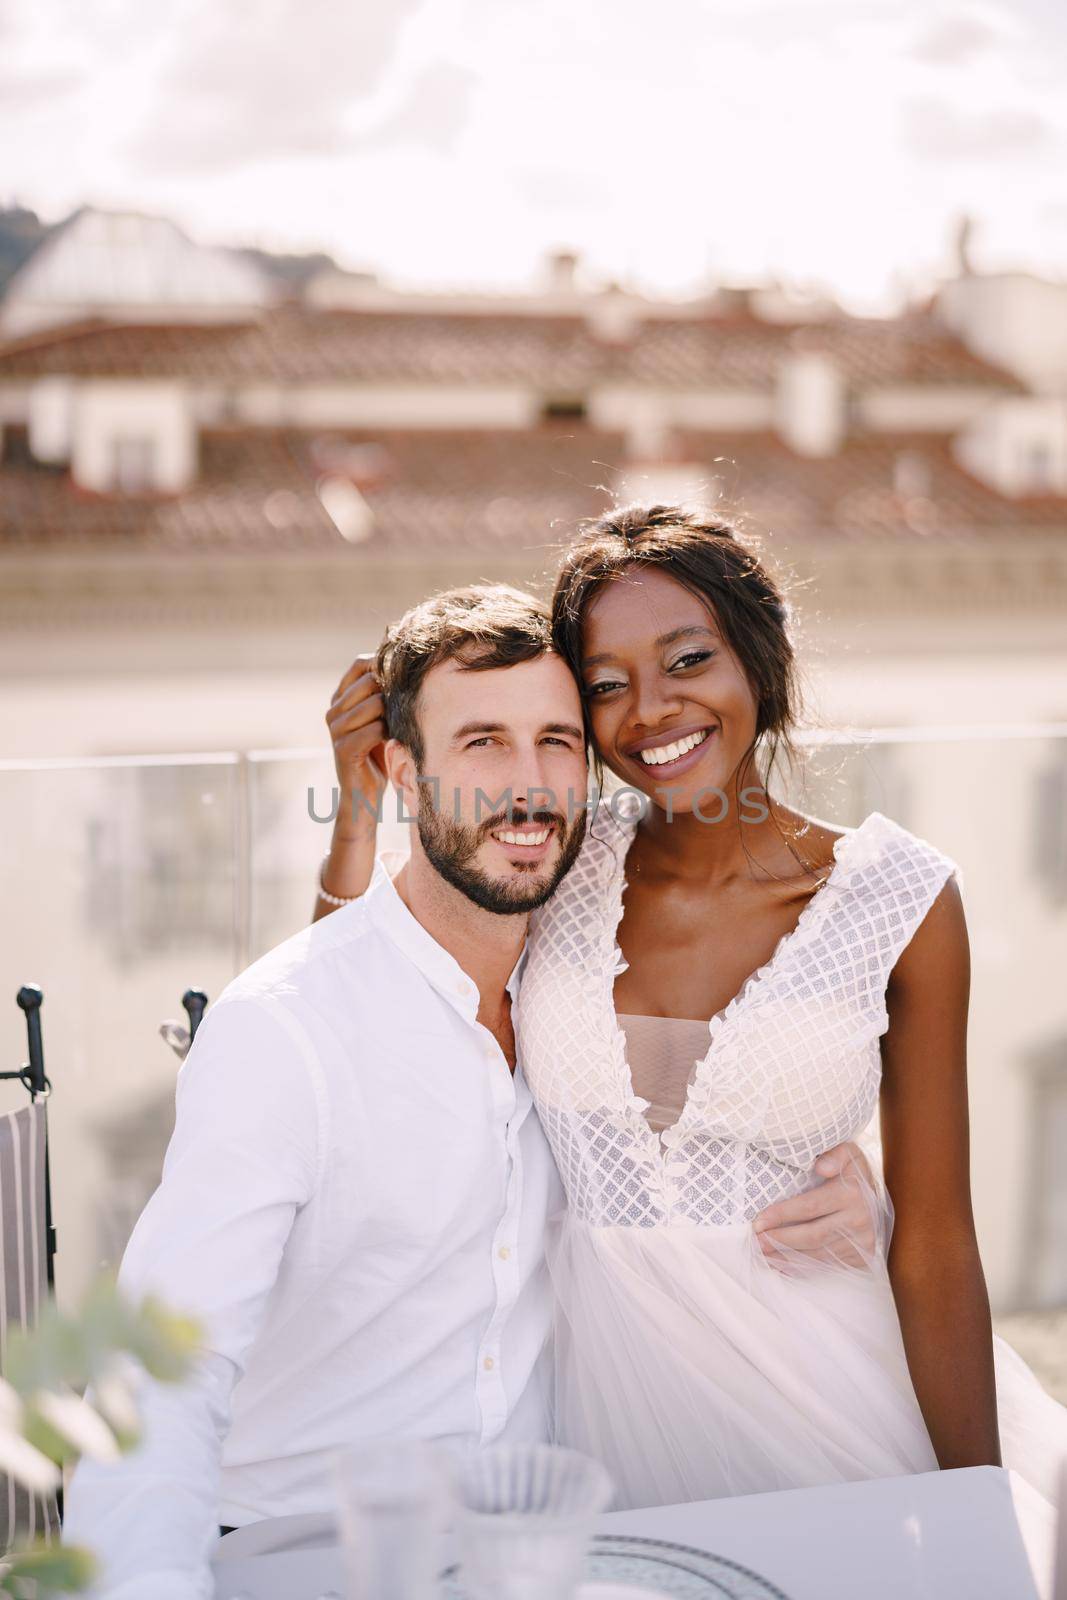 Interracial wedding couple. Destination fine-art wedding in Florence, Italy. African-American bride and Caucasian groom are sitting at rooftop wedding dinner table overlooking the city.